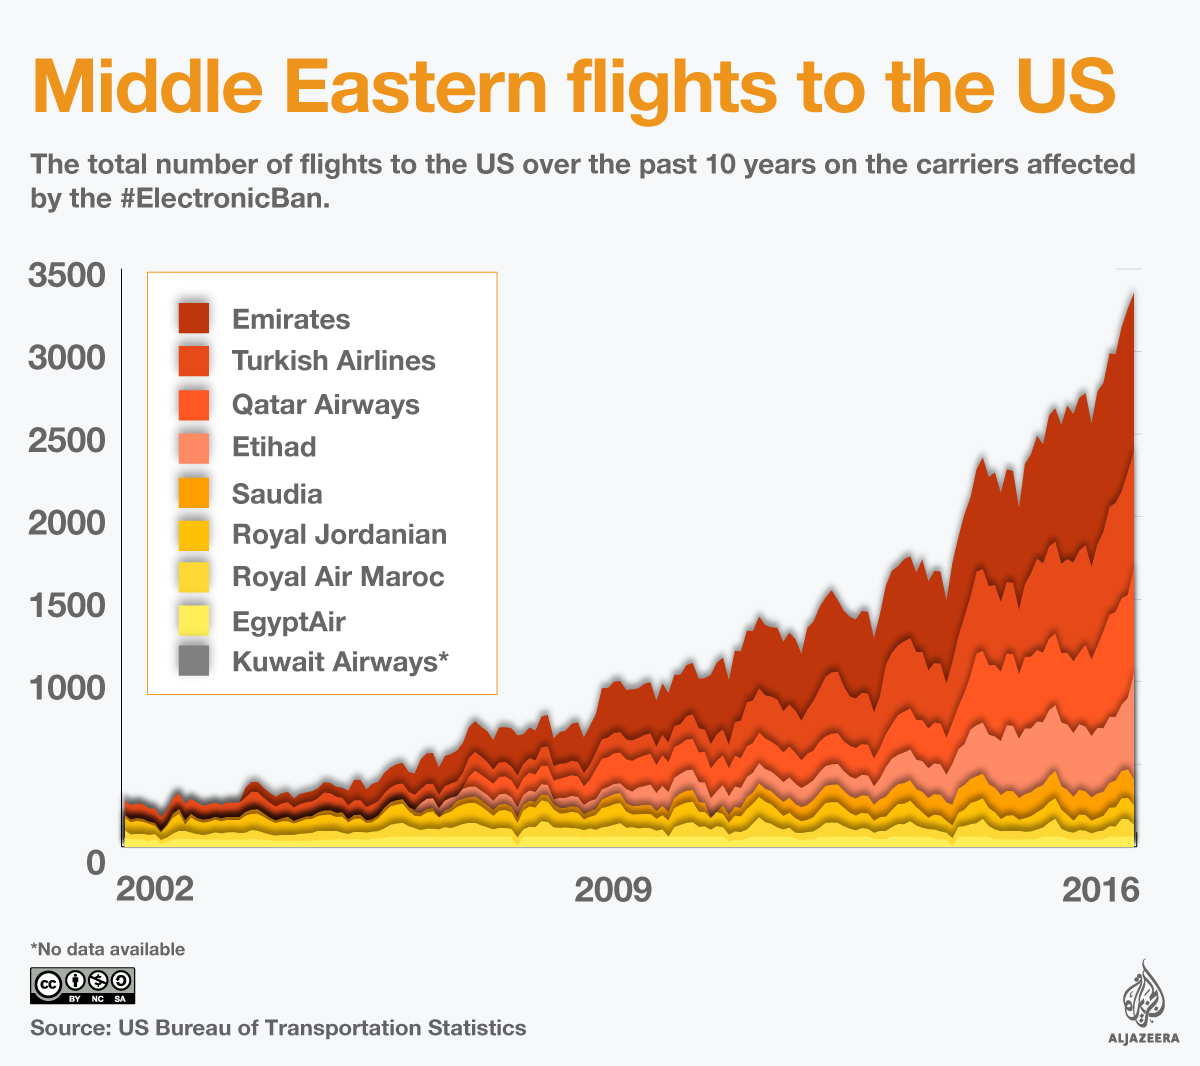  Monthly flights to the US from the Middle East since 2002